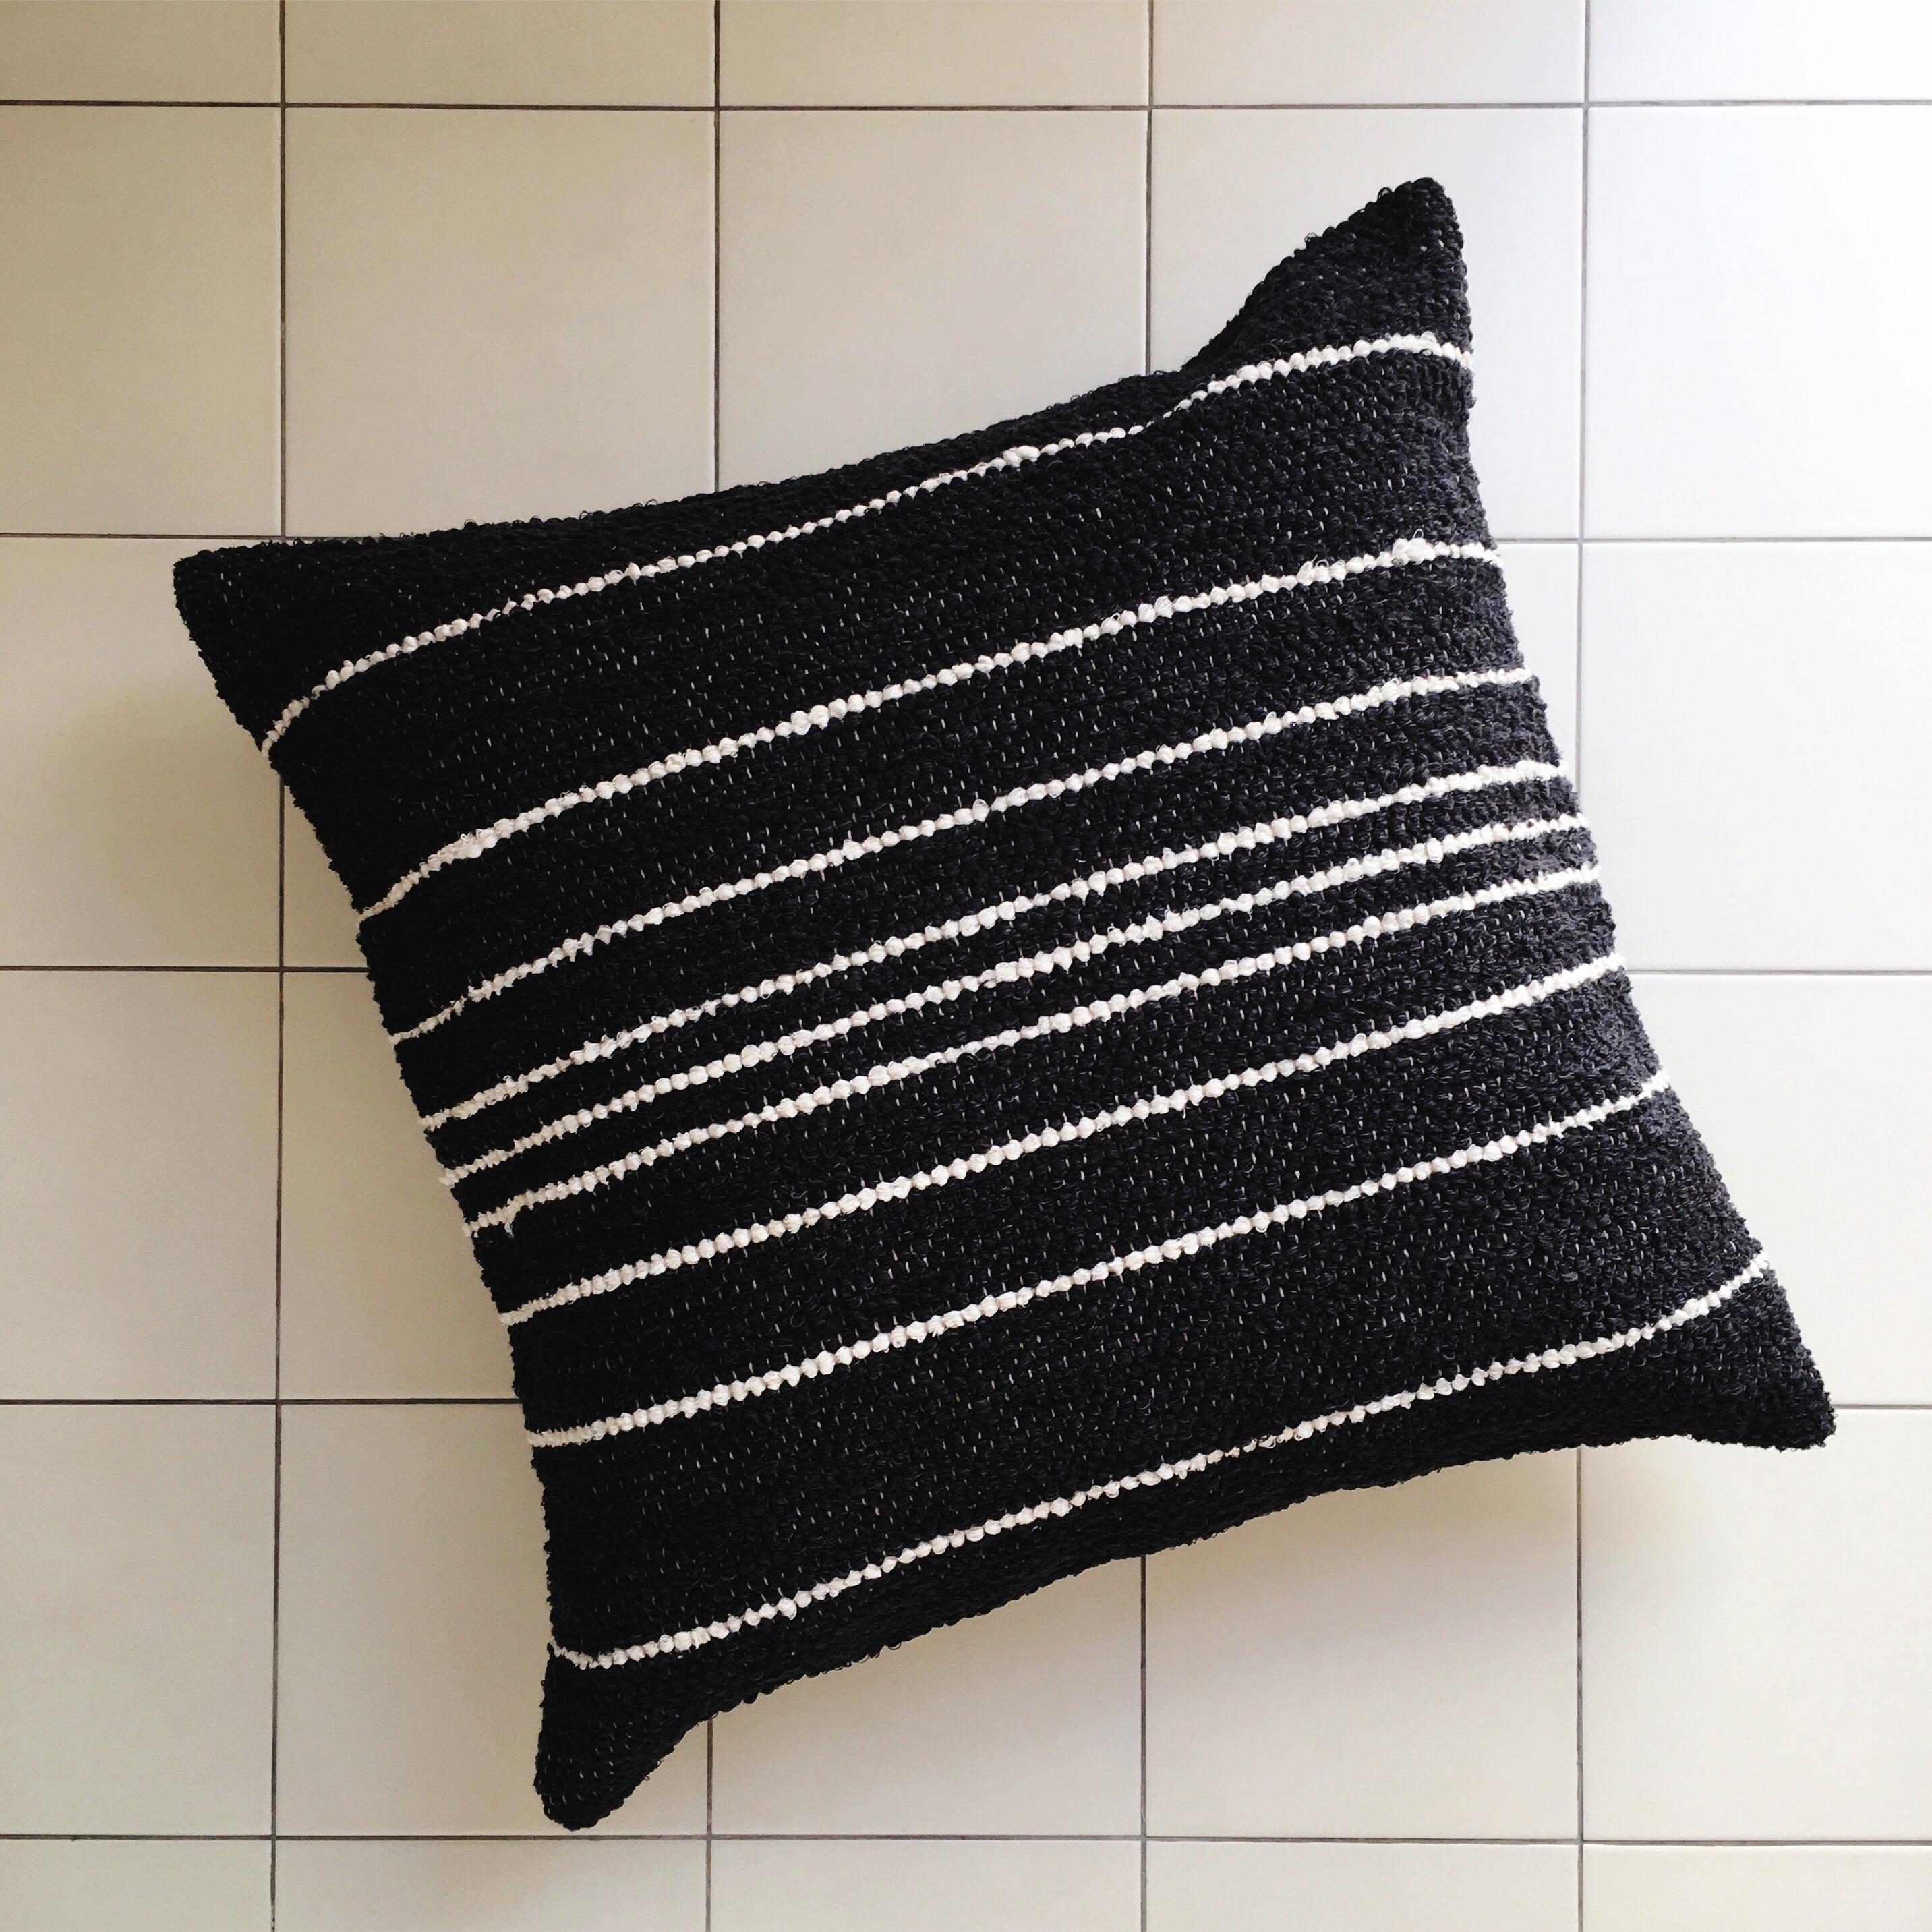 Great, bold, graphic striped pillow handmade of 100% cotton in one of the mother countries, Portugal. This large comfy throw pillow feels soft yet substantial and has a lovely texture.

Size: 24